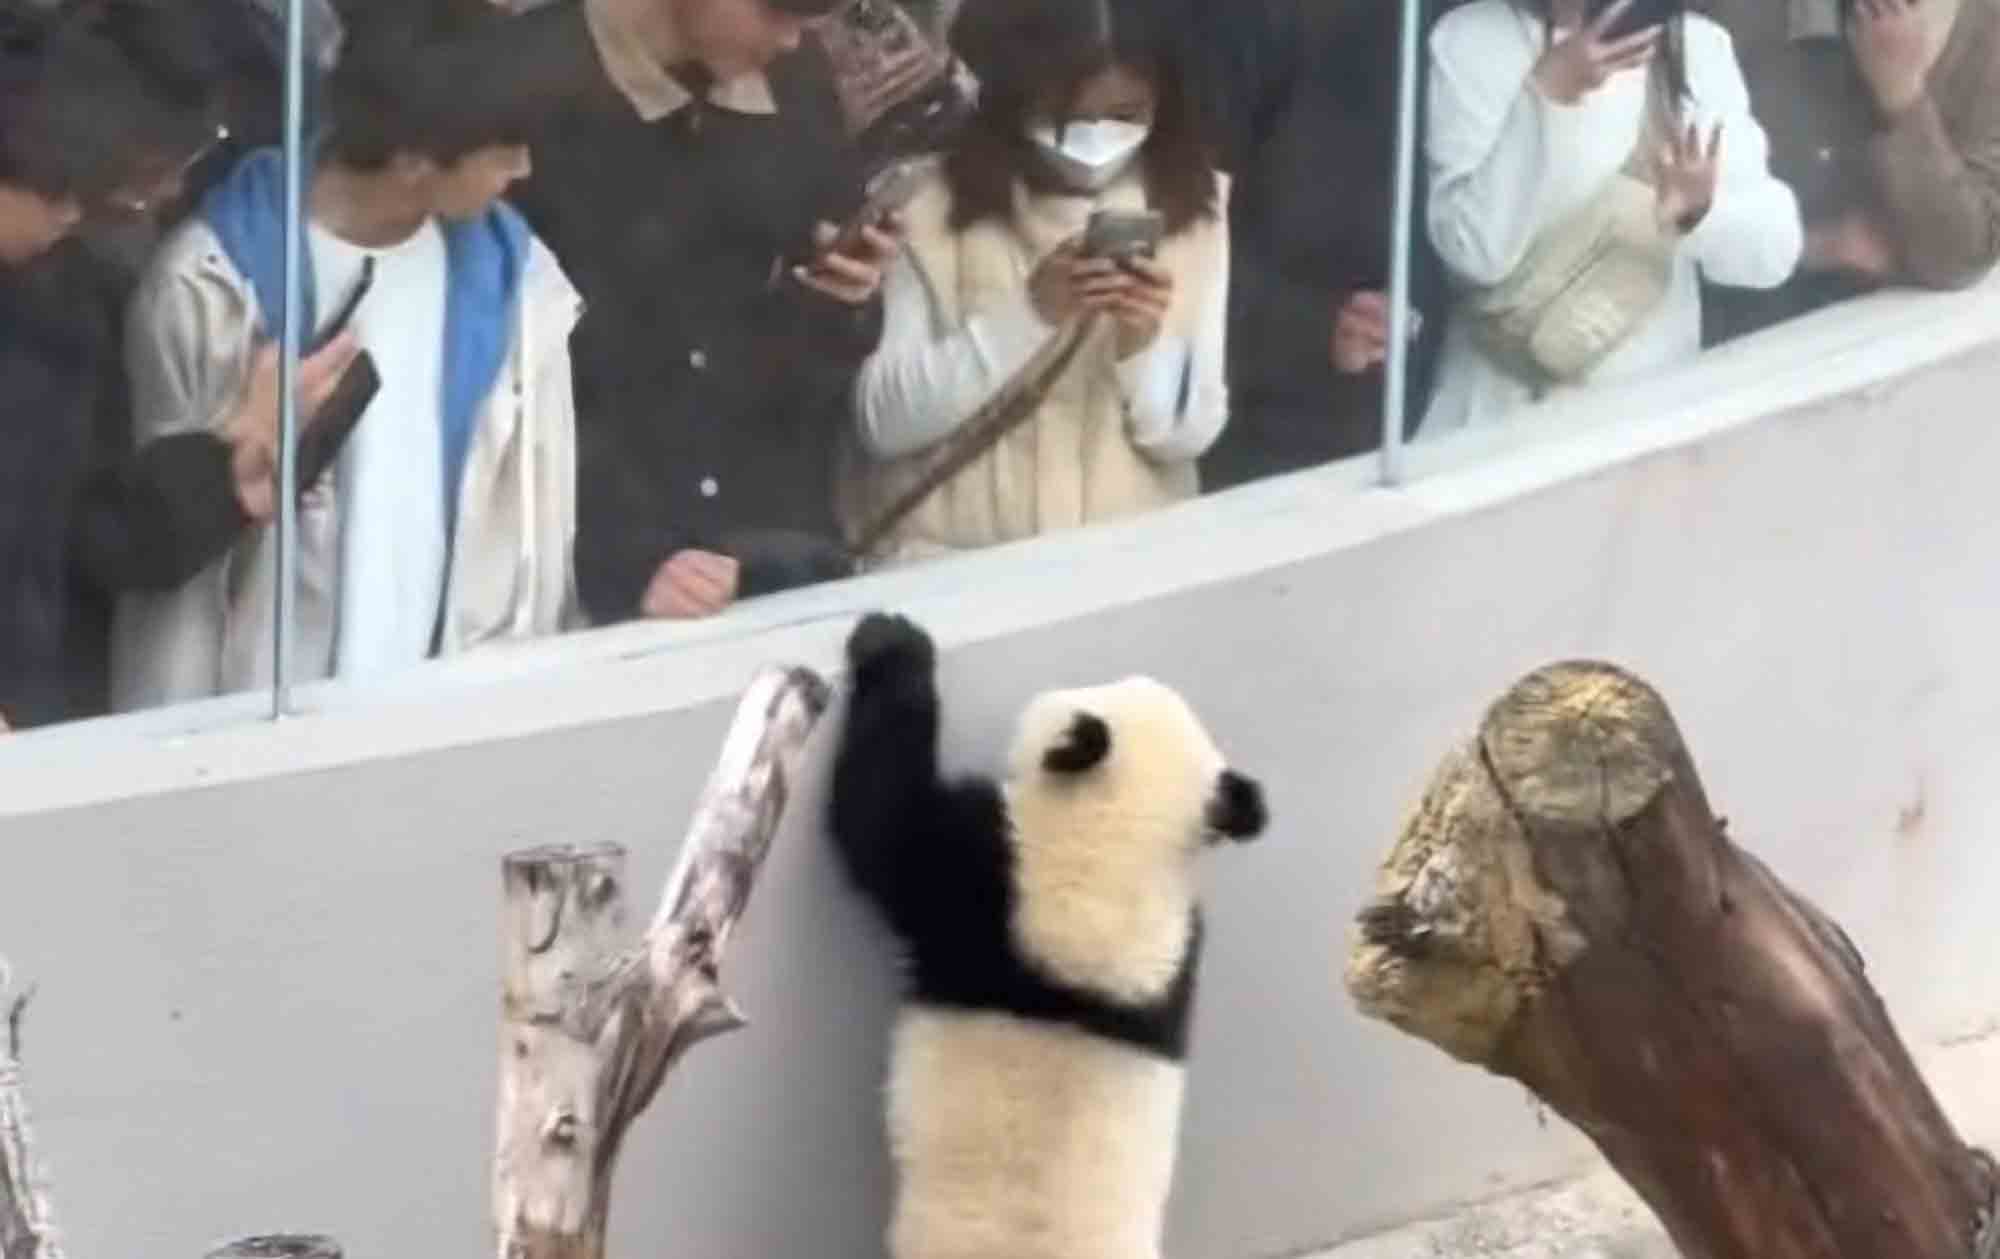 Viral Moment Panda Cub Goes Around On Hind Legs Greeting Queueing Zoo Visitors